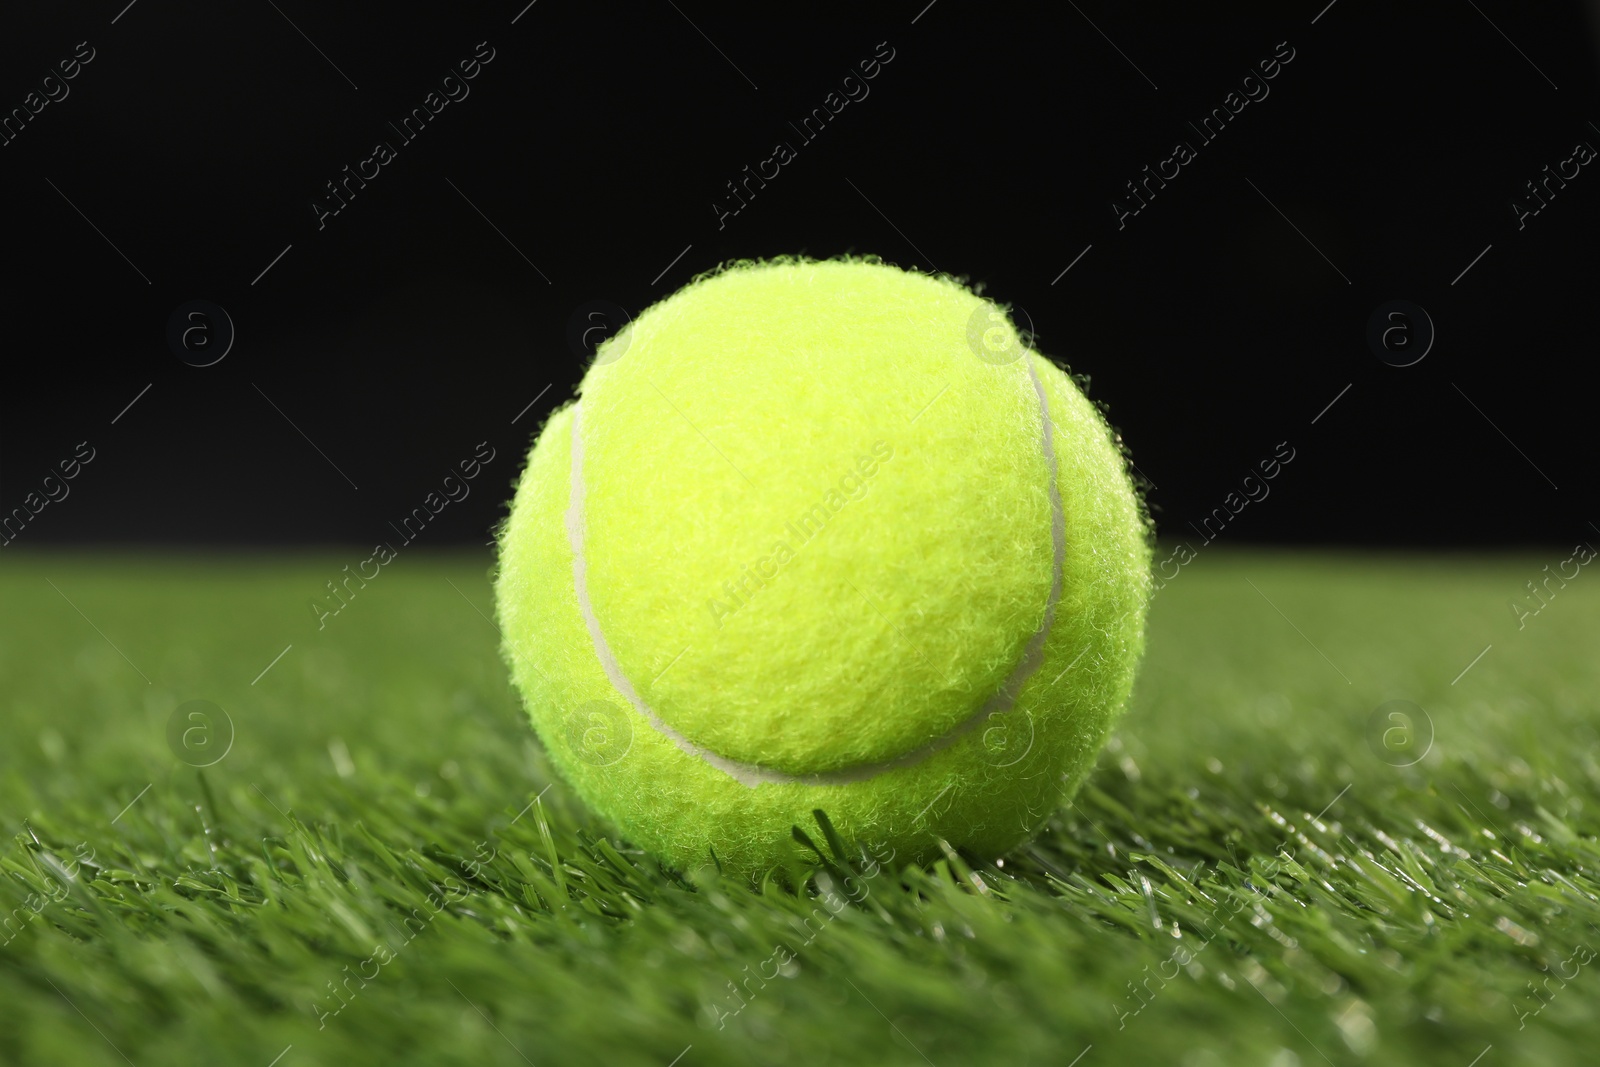 Photo of Tennis ball on green grass against black background, closeup